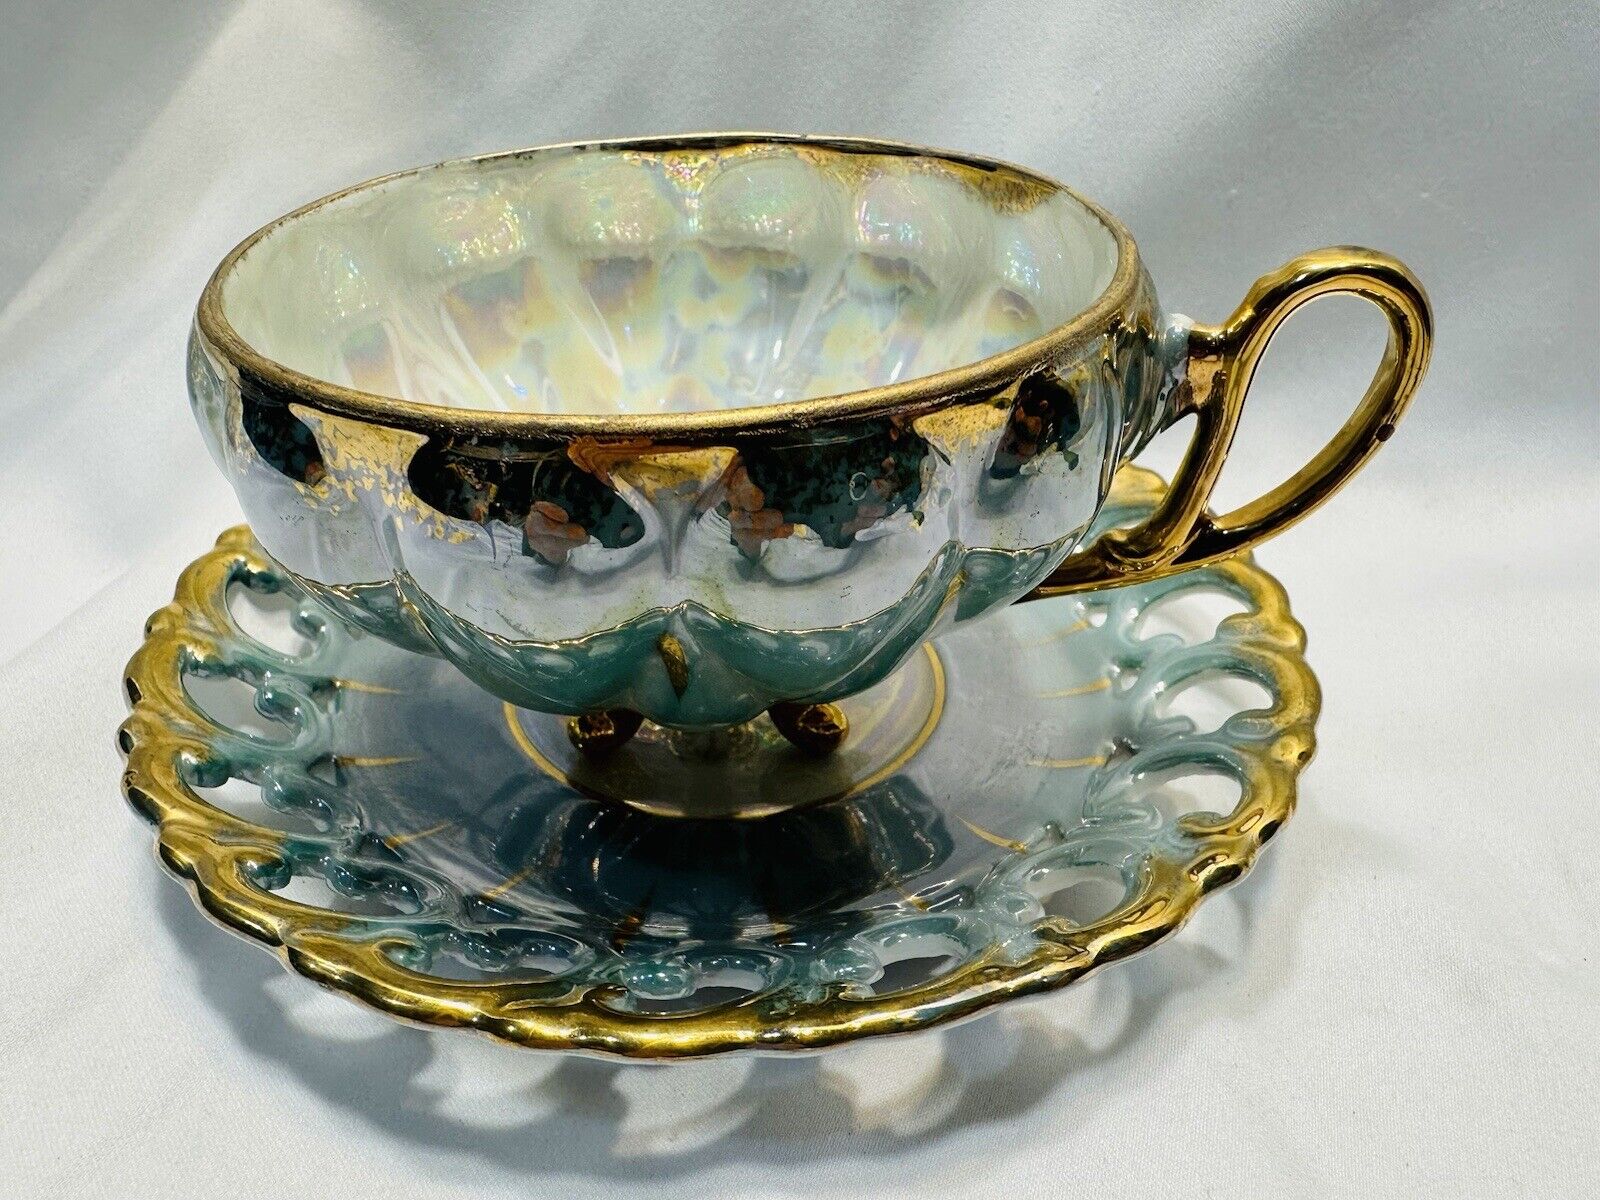 Vtg Royal Sealy China Turquoise Pearlescent Footed Pierced Gold Tea Cup Saucer